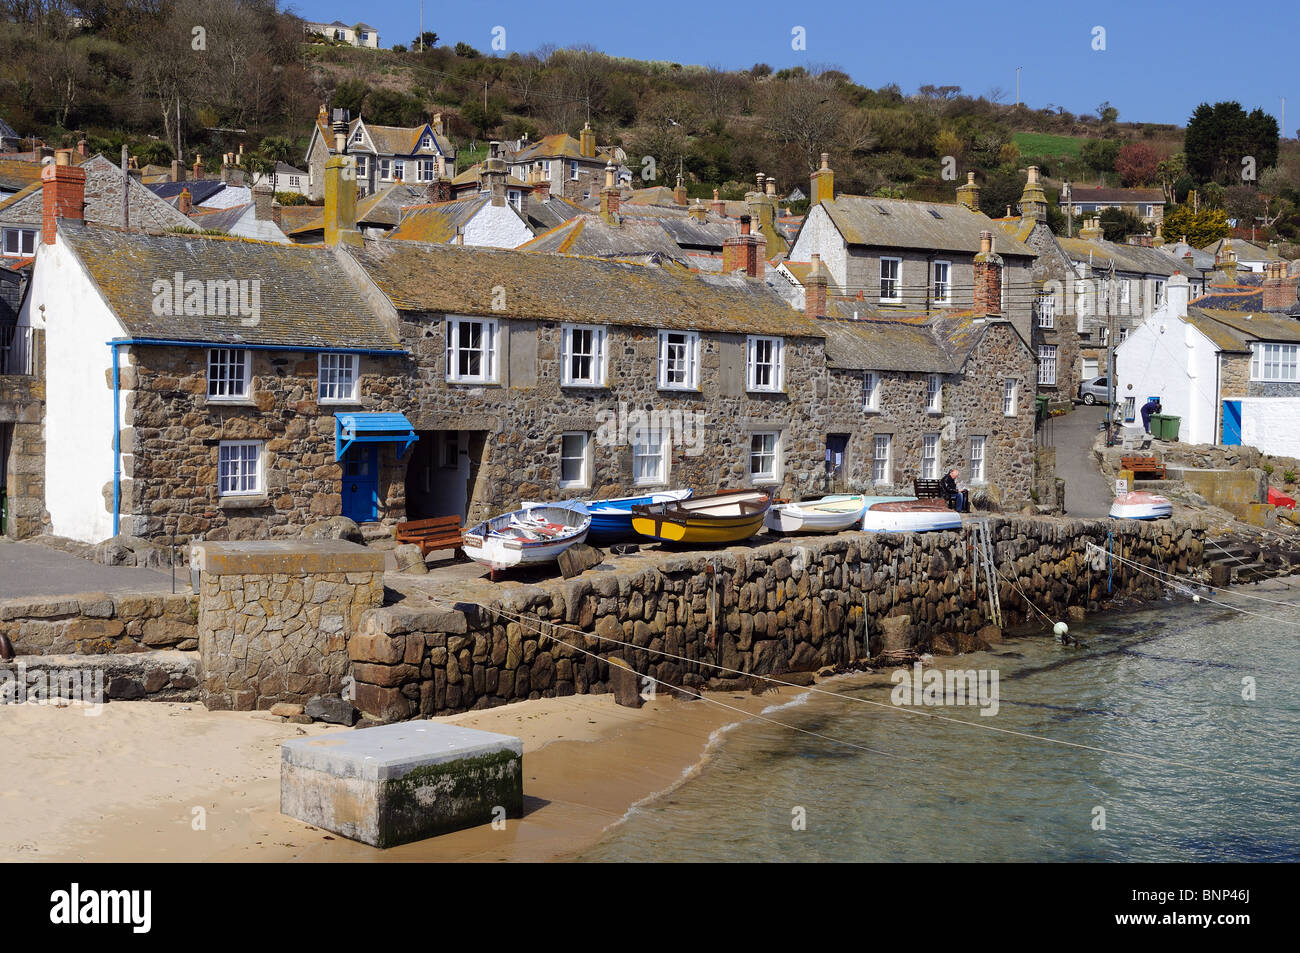 Holiday Cottages Overlooking The Harbour At Mousehole In Cornwall